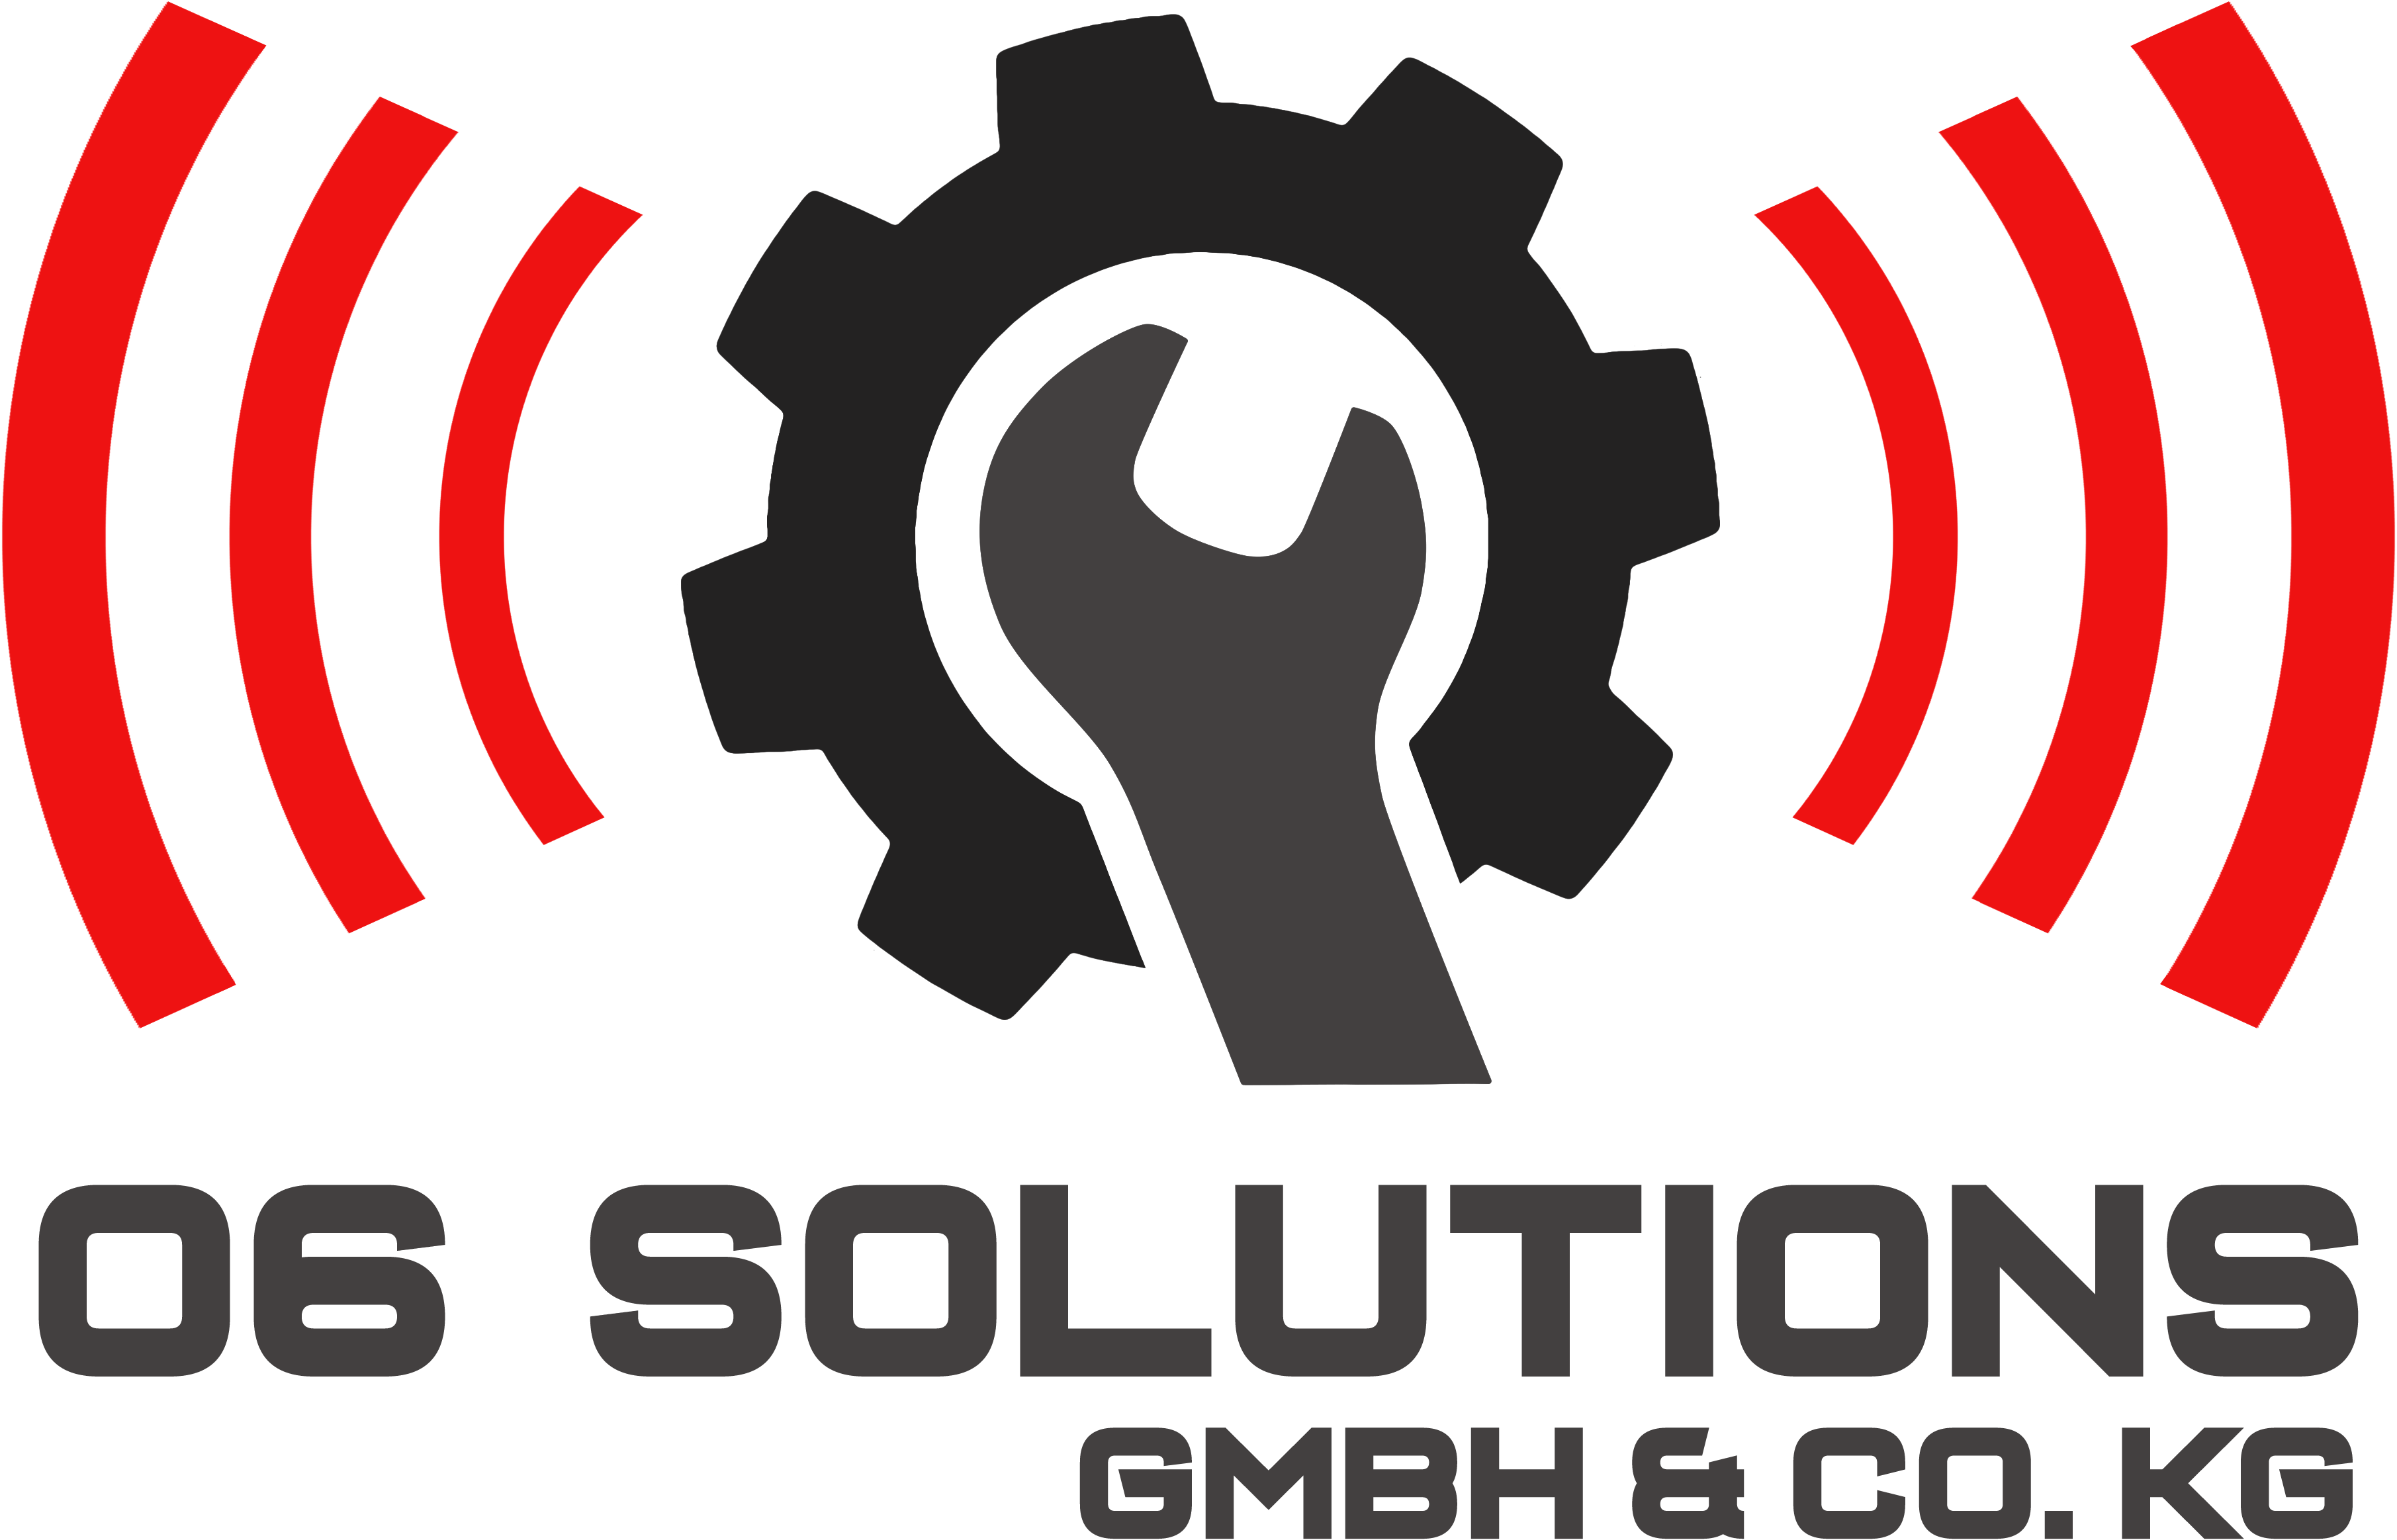 06 solutions GmbH & Co. KG